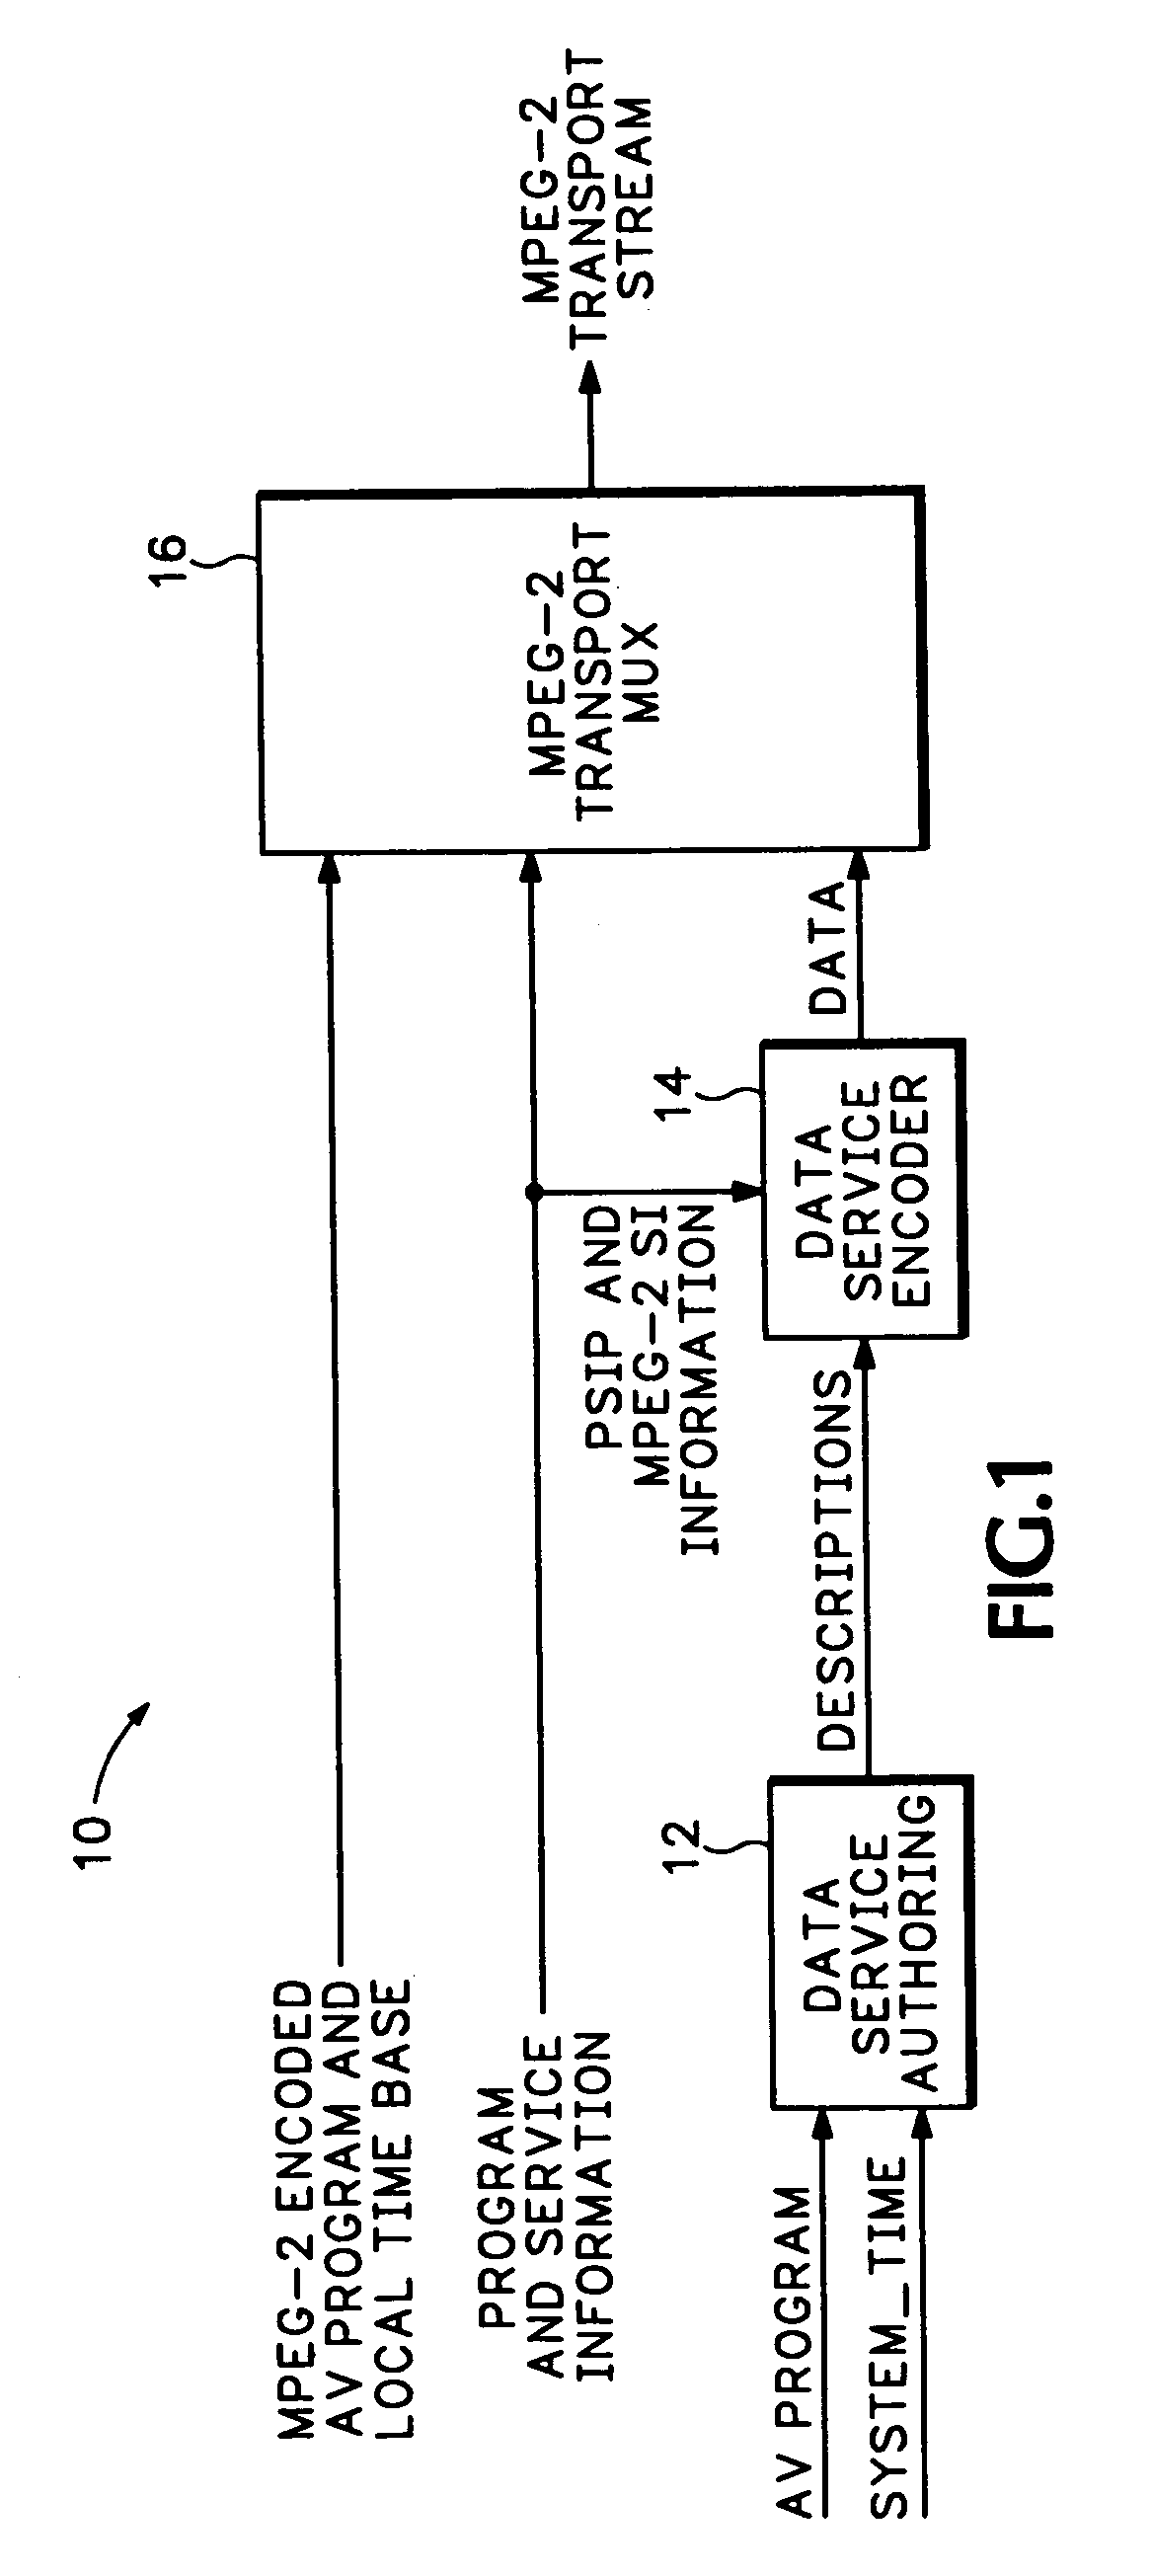 DTV data service application and receiver mechanism